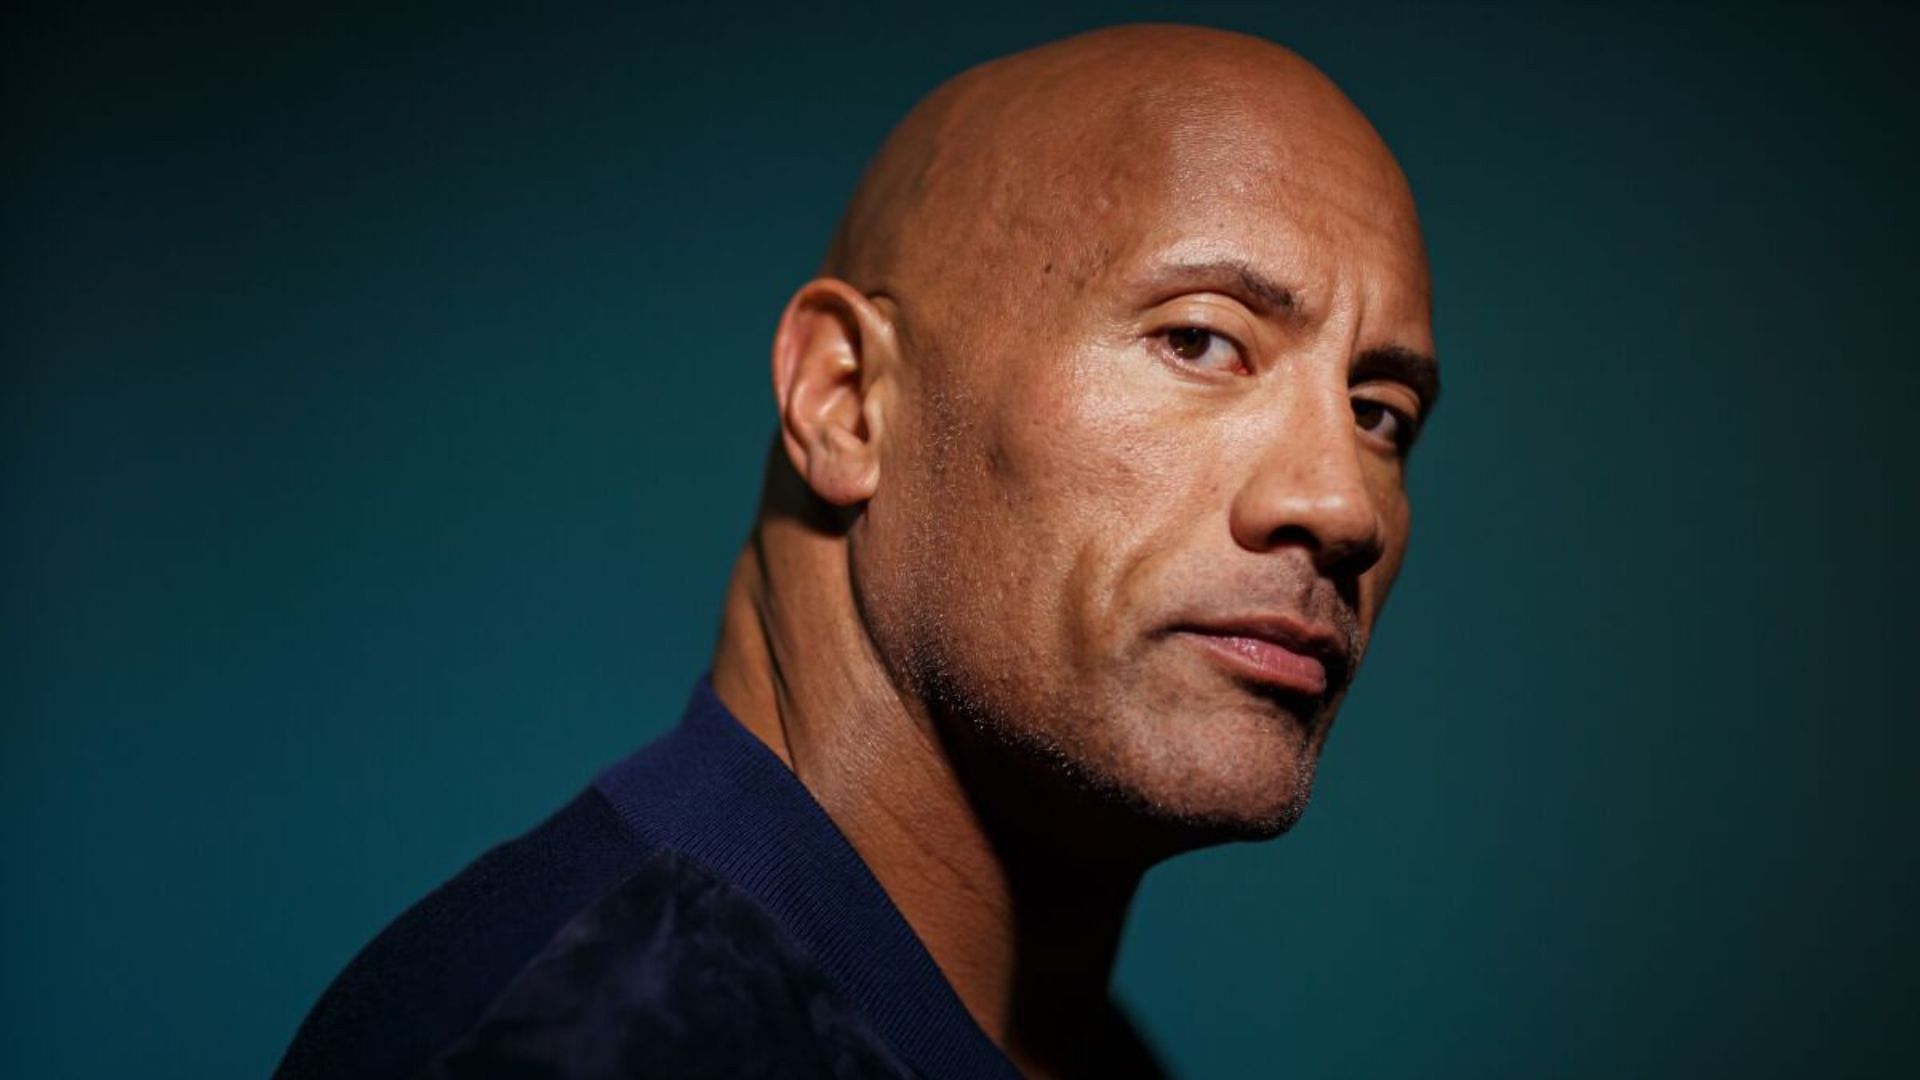 The Rock is rumored to be returning to WWE soon